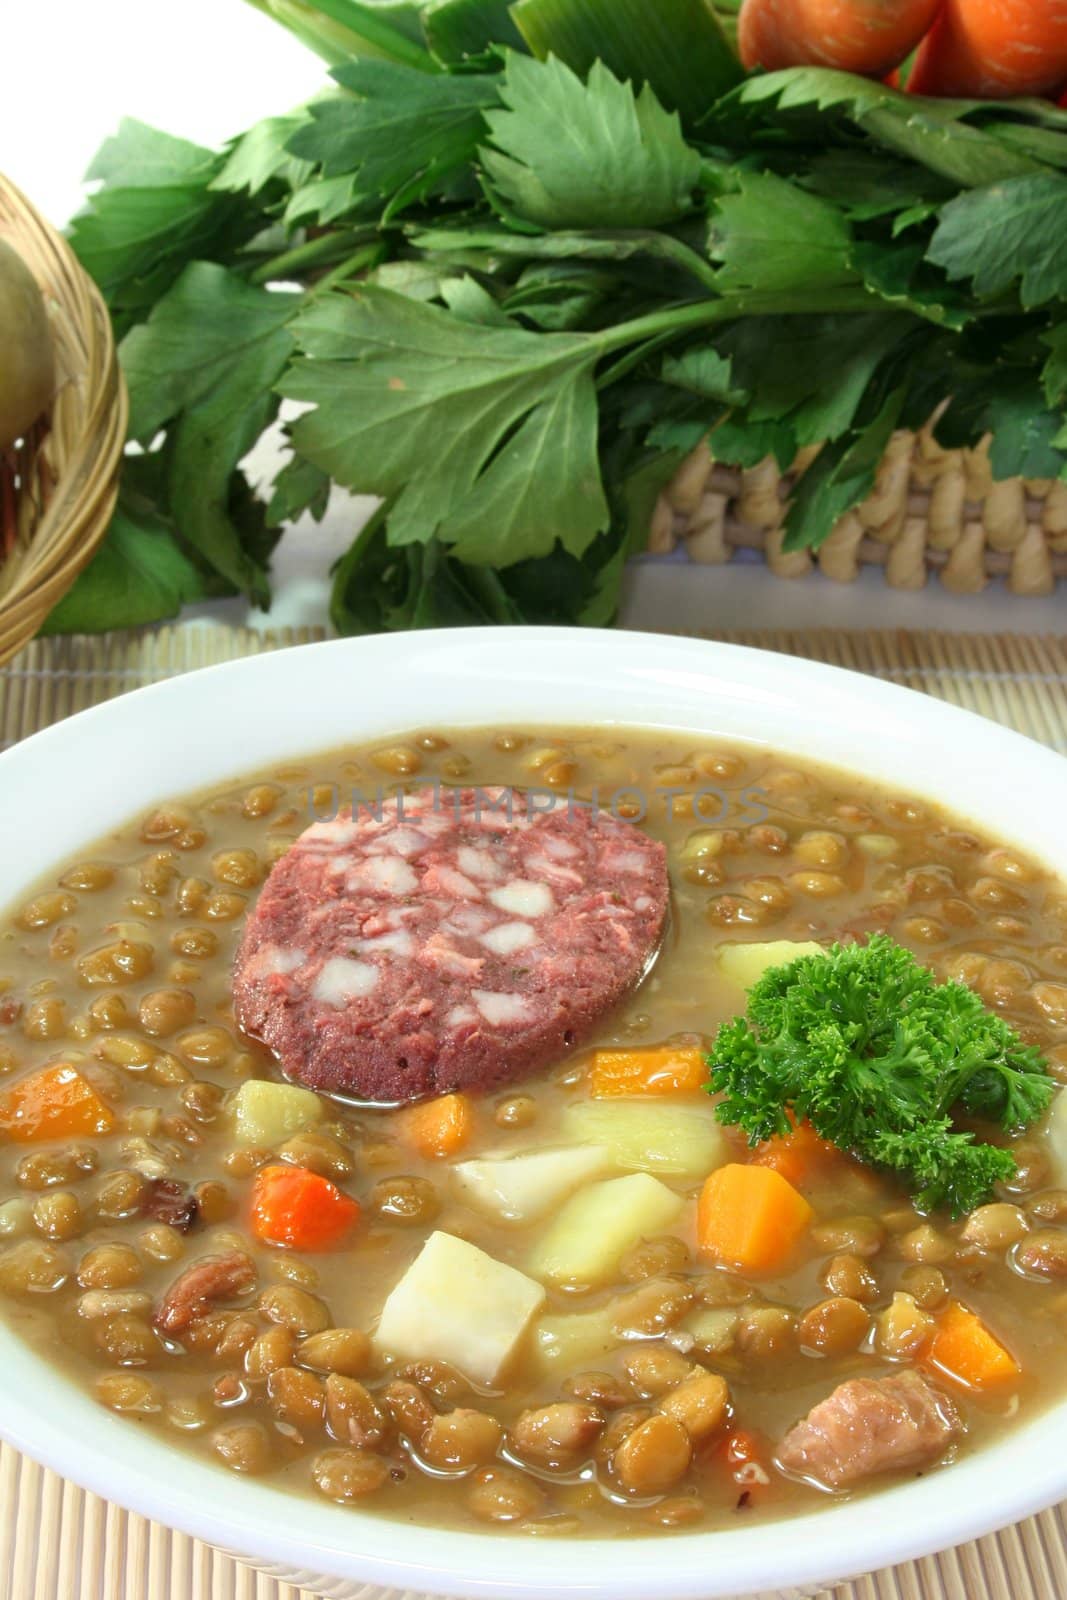 Lentil stew with vegetables and parsley